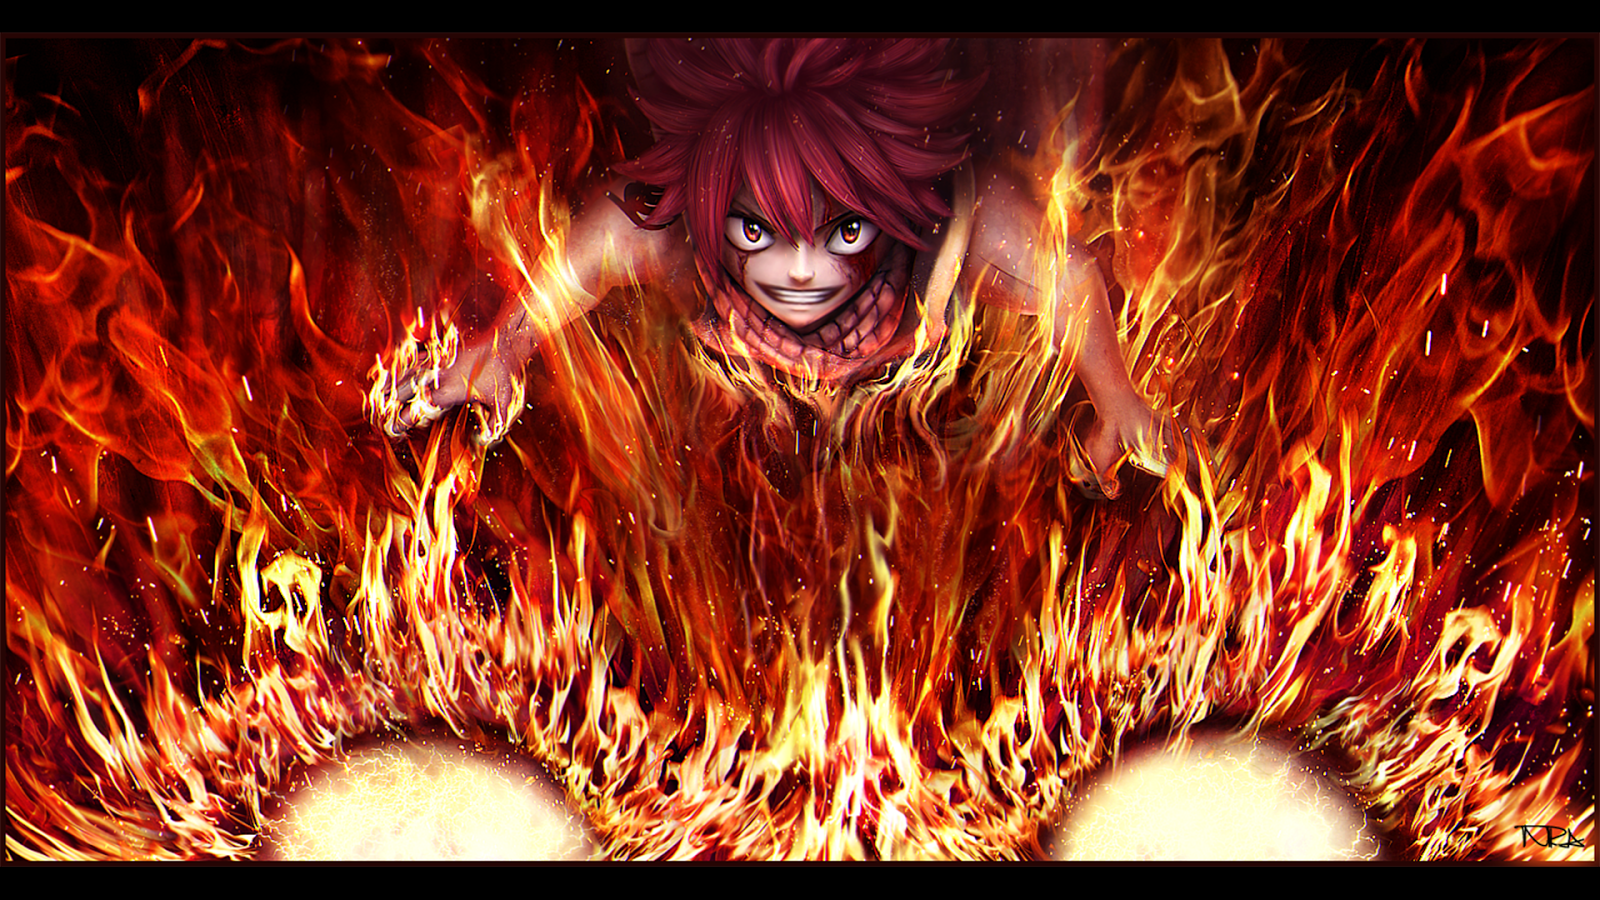 70+ Anime Fairy Tail Wallpapers HD (2020) - We 7